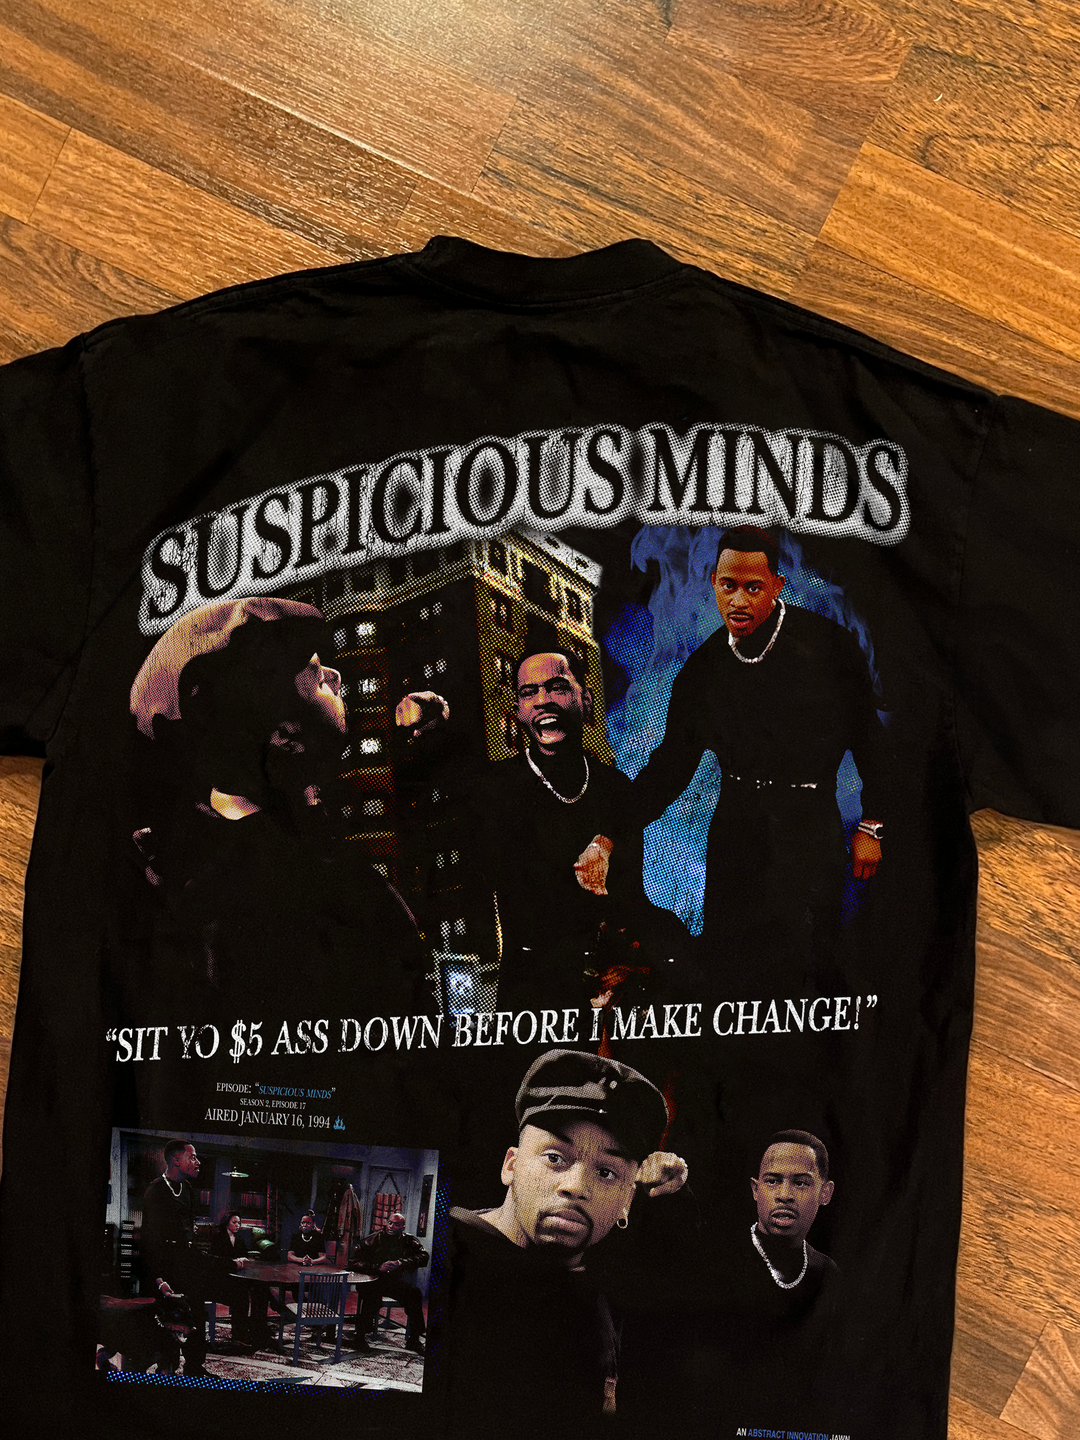 THE SUSPICIOUS MINDS TEE